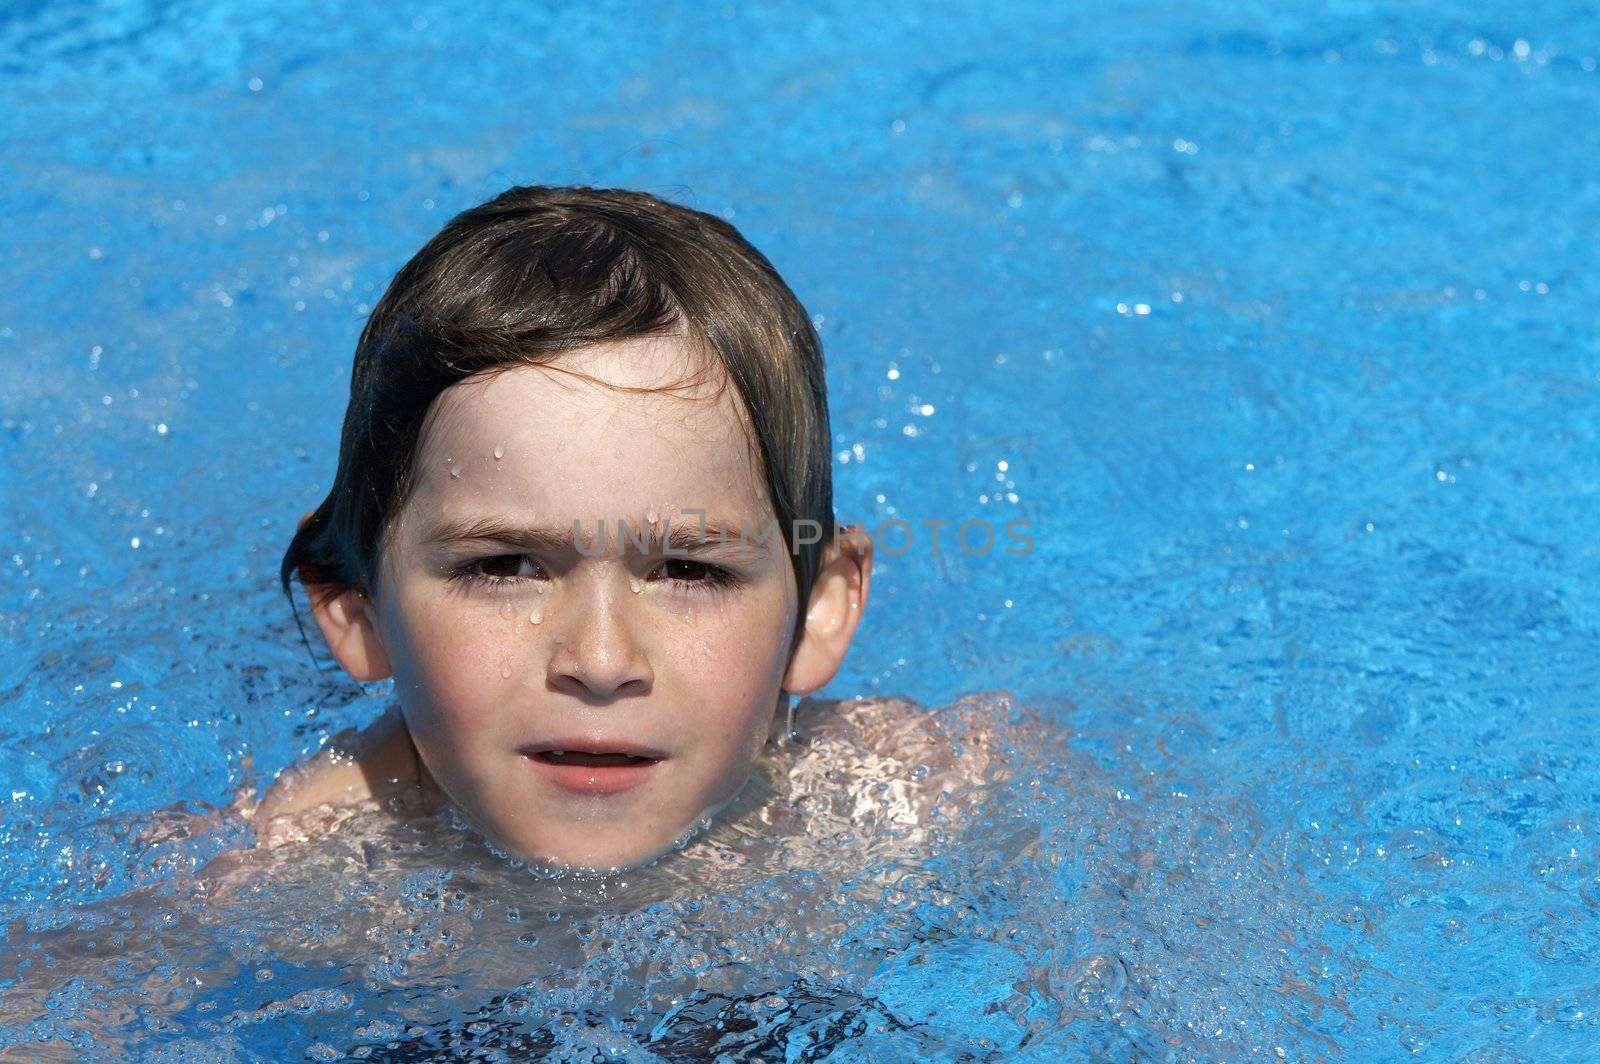 a boy playing in a pool of water during the summer